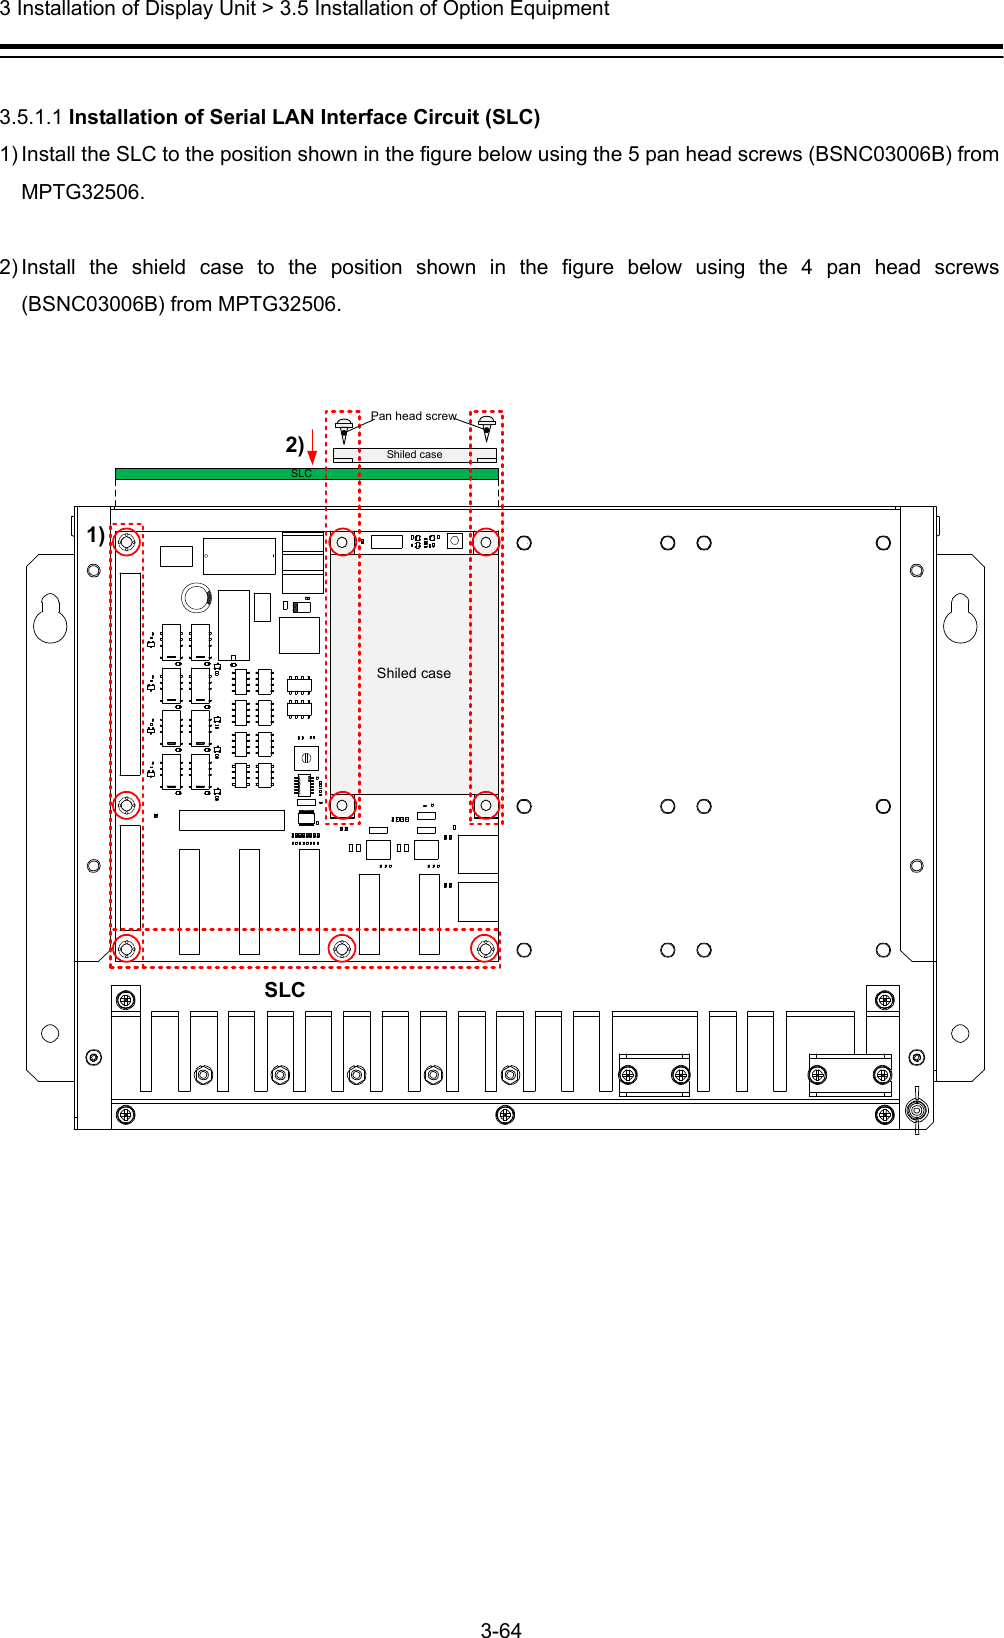  3 Installation of Display Unit &gt; 3.5 Installation of Option Equipment 3-64   3.5.1.1 Installation of Serial LAN Interface Circuit (SLC) 1) Install the SLC to the position shown in the figure below using the 5 pan head screws (BSNC03006B) from MPTG32506.  2) Install the shield case to the position shown in the figure below using the 4 pan head screws (BSNC03006B) from MPTG32506.   Shiled caseSLCShiled case2)1)PC810Pan head screwSLC 